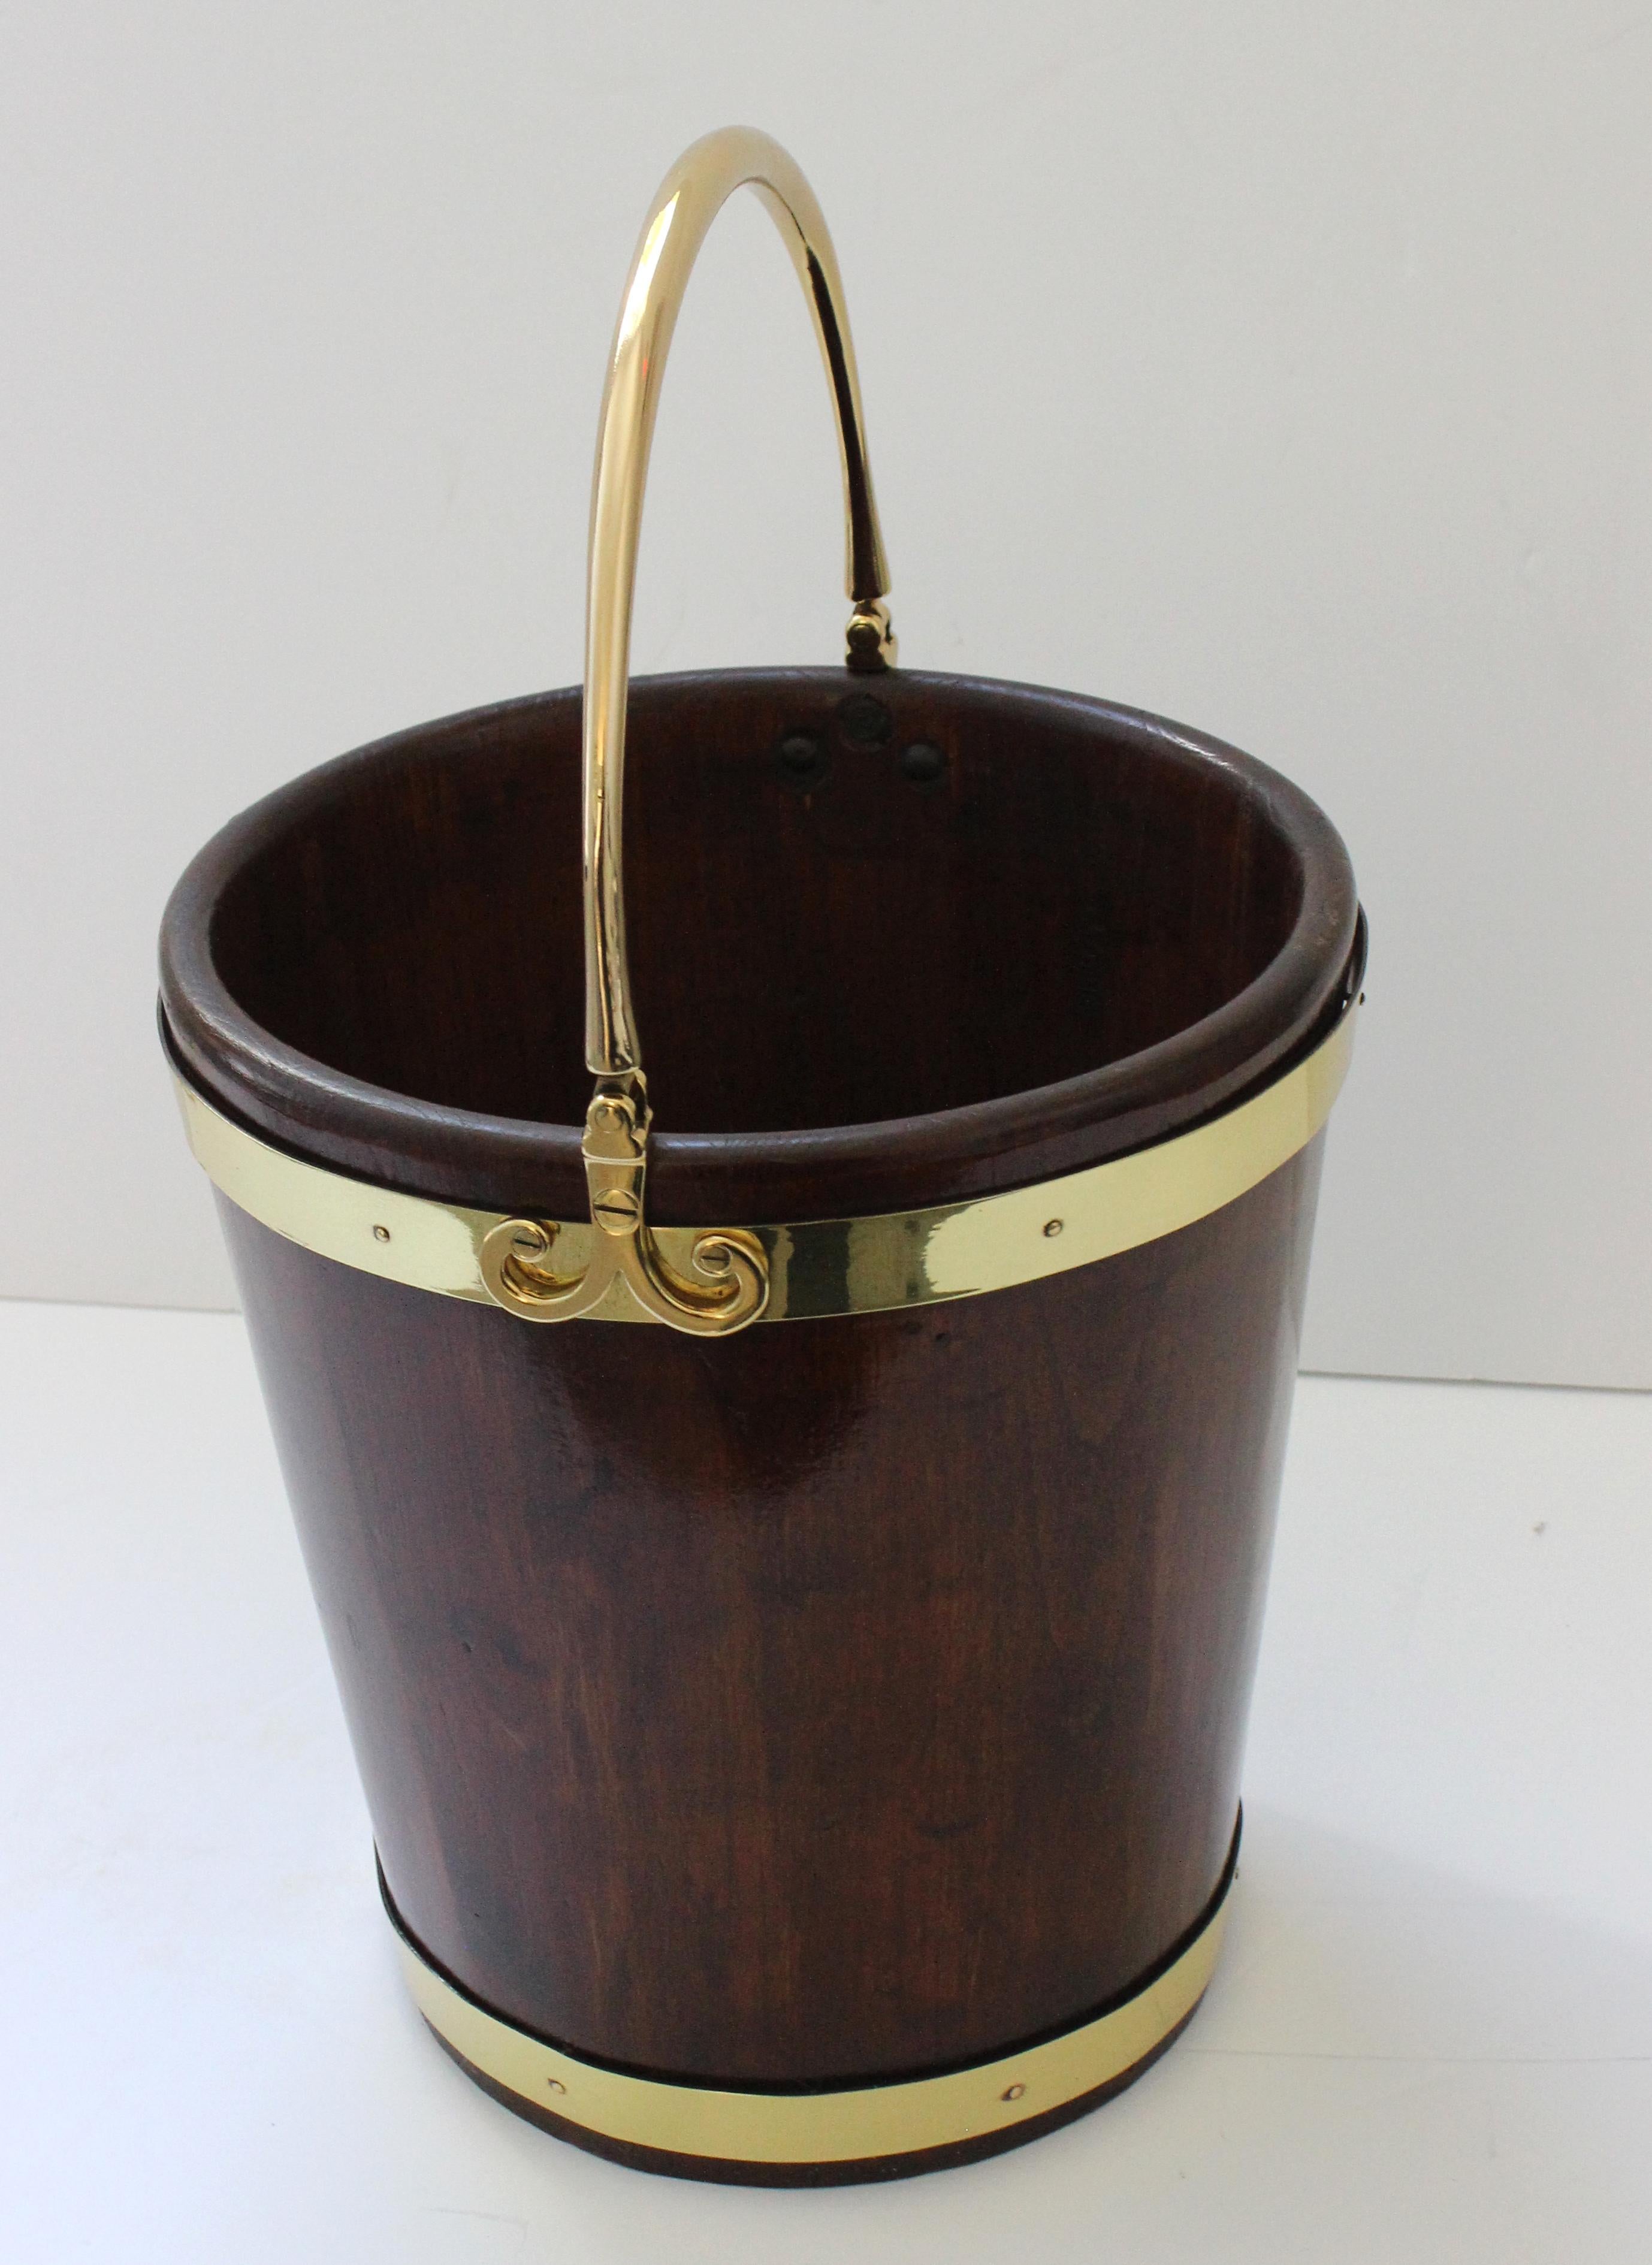 This styish peat bucket is very much in the Edwardian style and it was created by the spanish workshop of Valenti.

Note: The piece has been professionally restored and the brass polished and finished with a clear lacquer coating.

Note: Overall